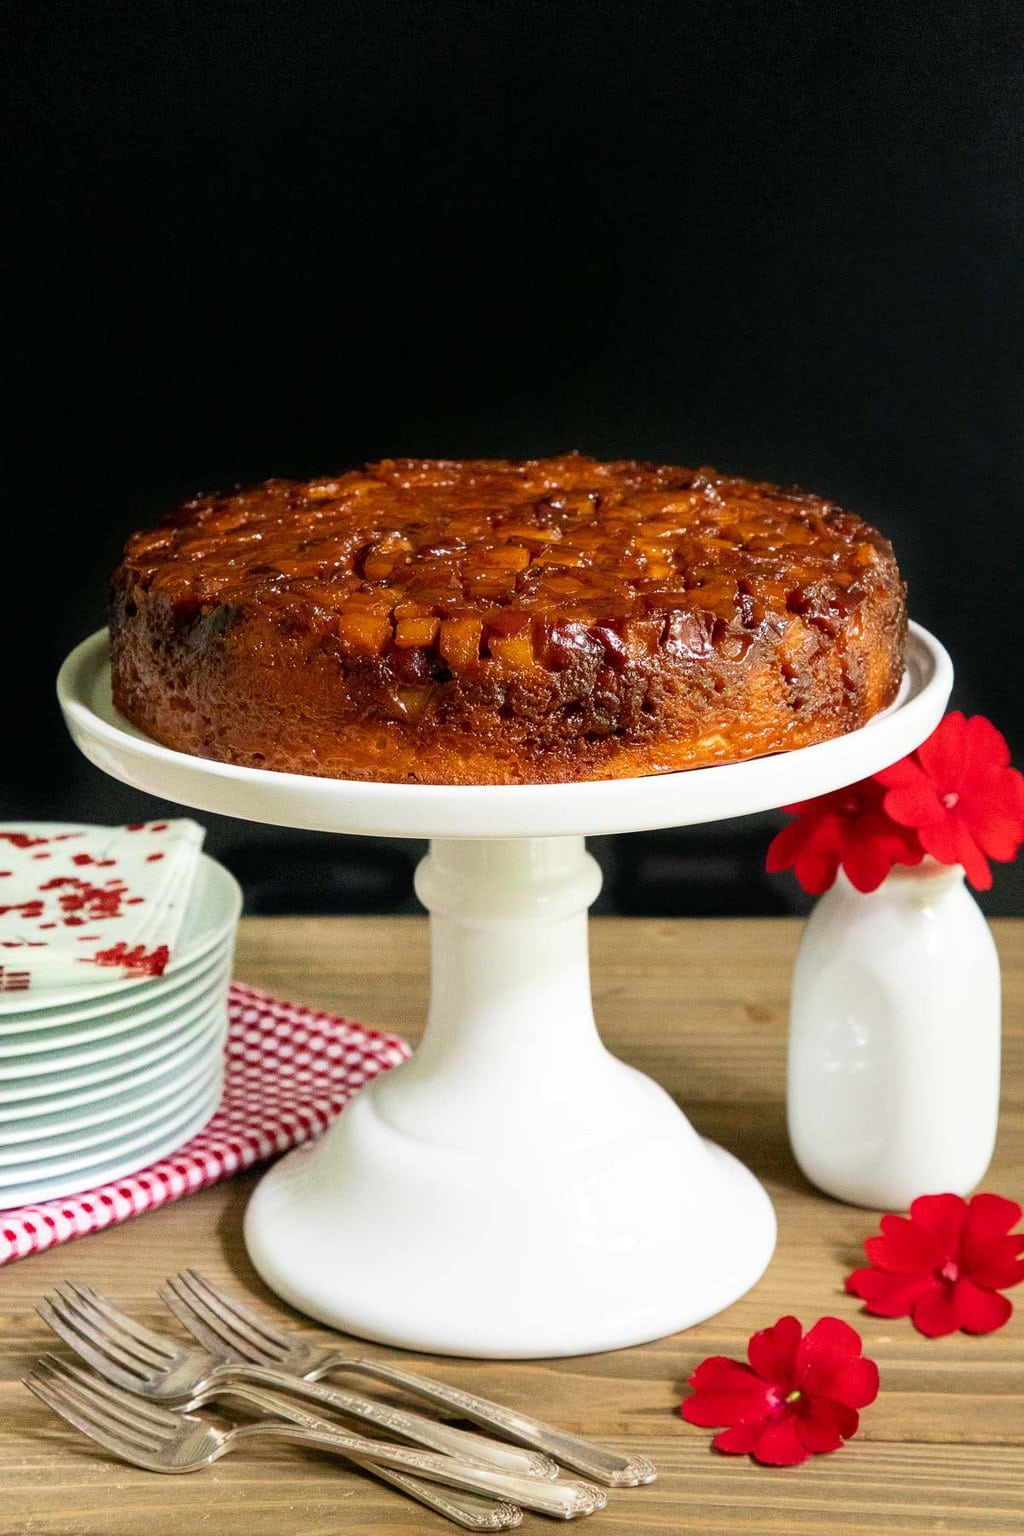 Vertical photo of a French Caramel Apple Cake on a white pedestal cake stand against a black background.